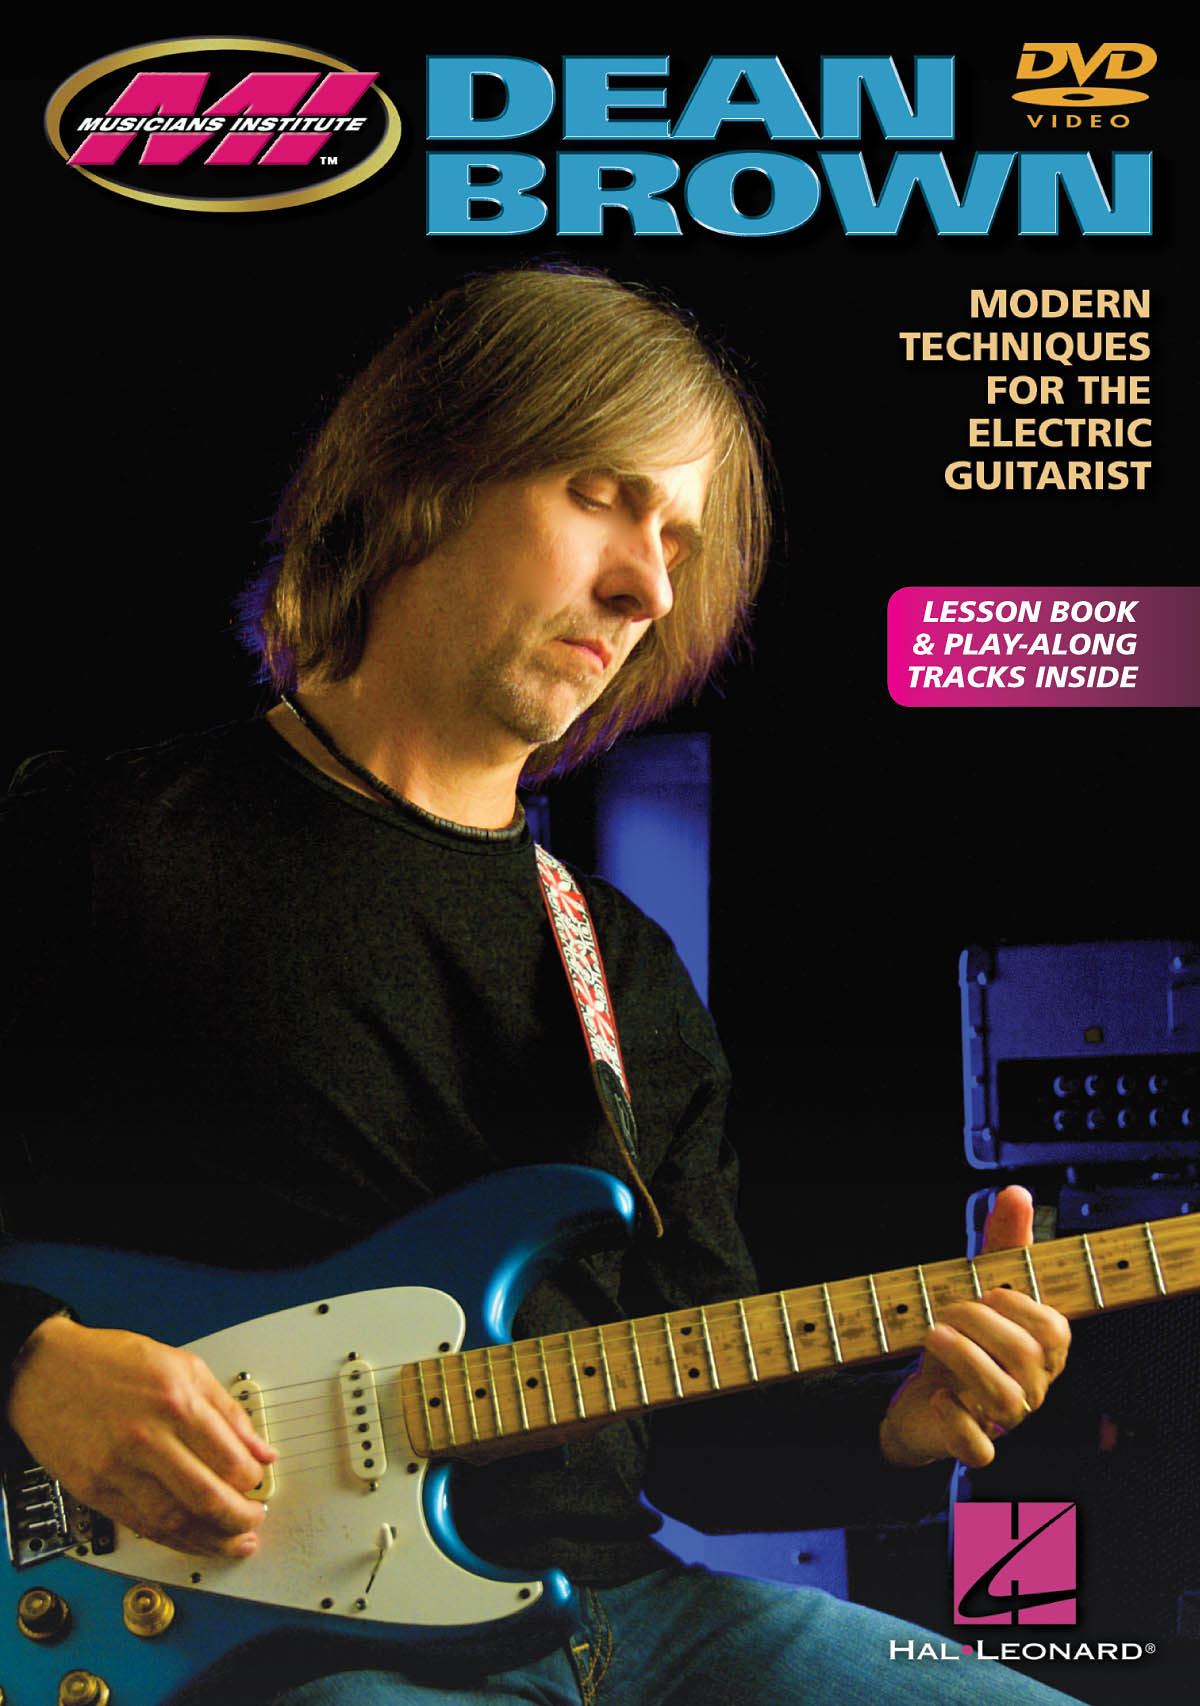 Dean Brown - Modern Techniques for the Electric Guitarist